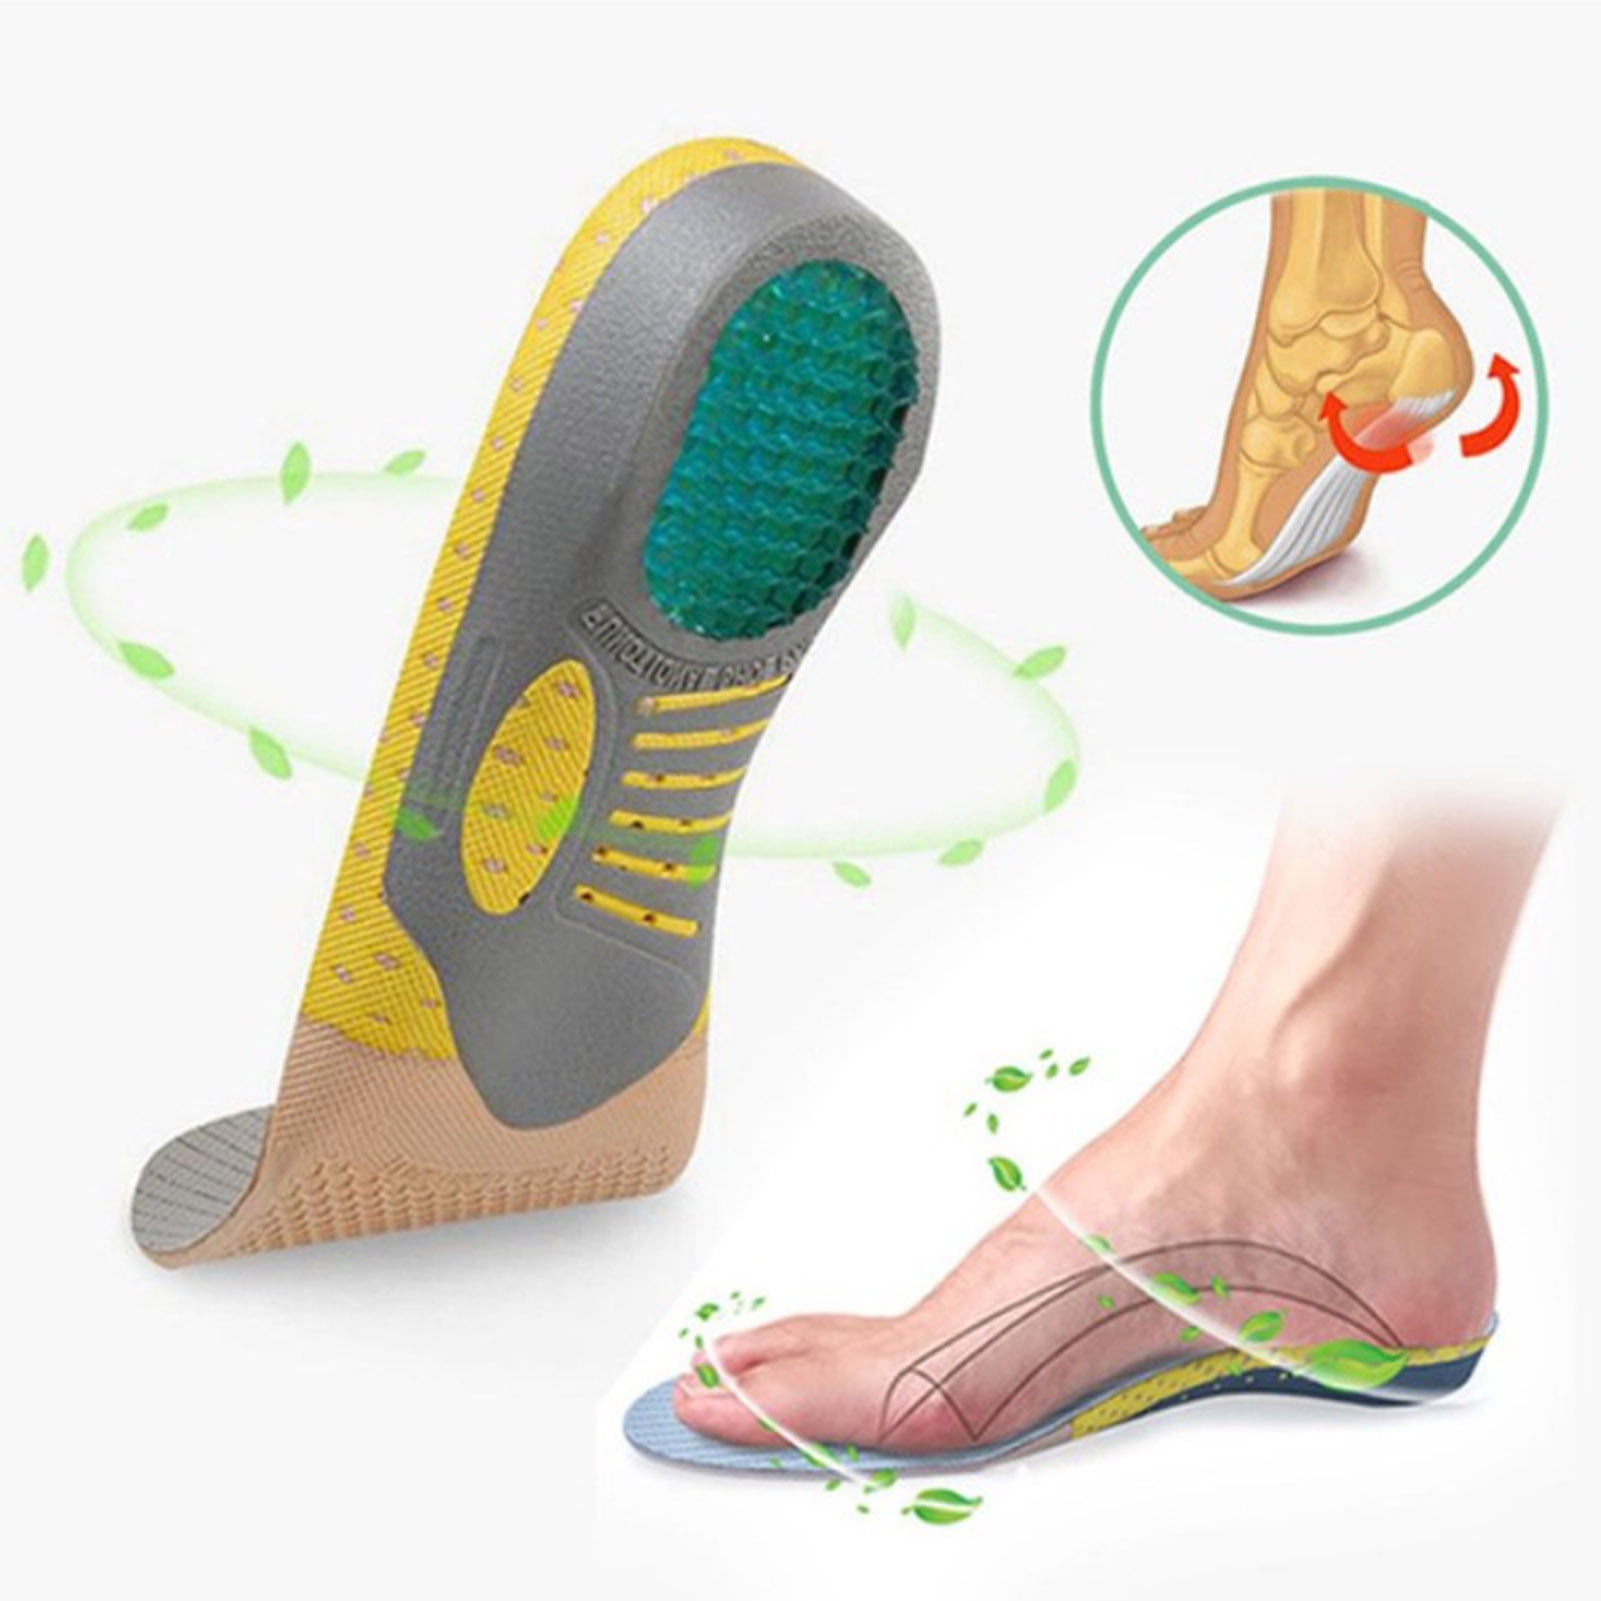  iFitna Plantar Fasciitis High Arch Support Insoles for Men  Women Orthotic Shoe Inserts Relief Feet Pain Flat Feet : Health & Household